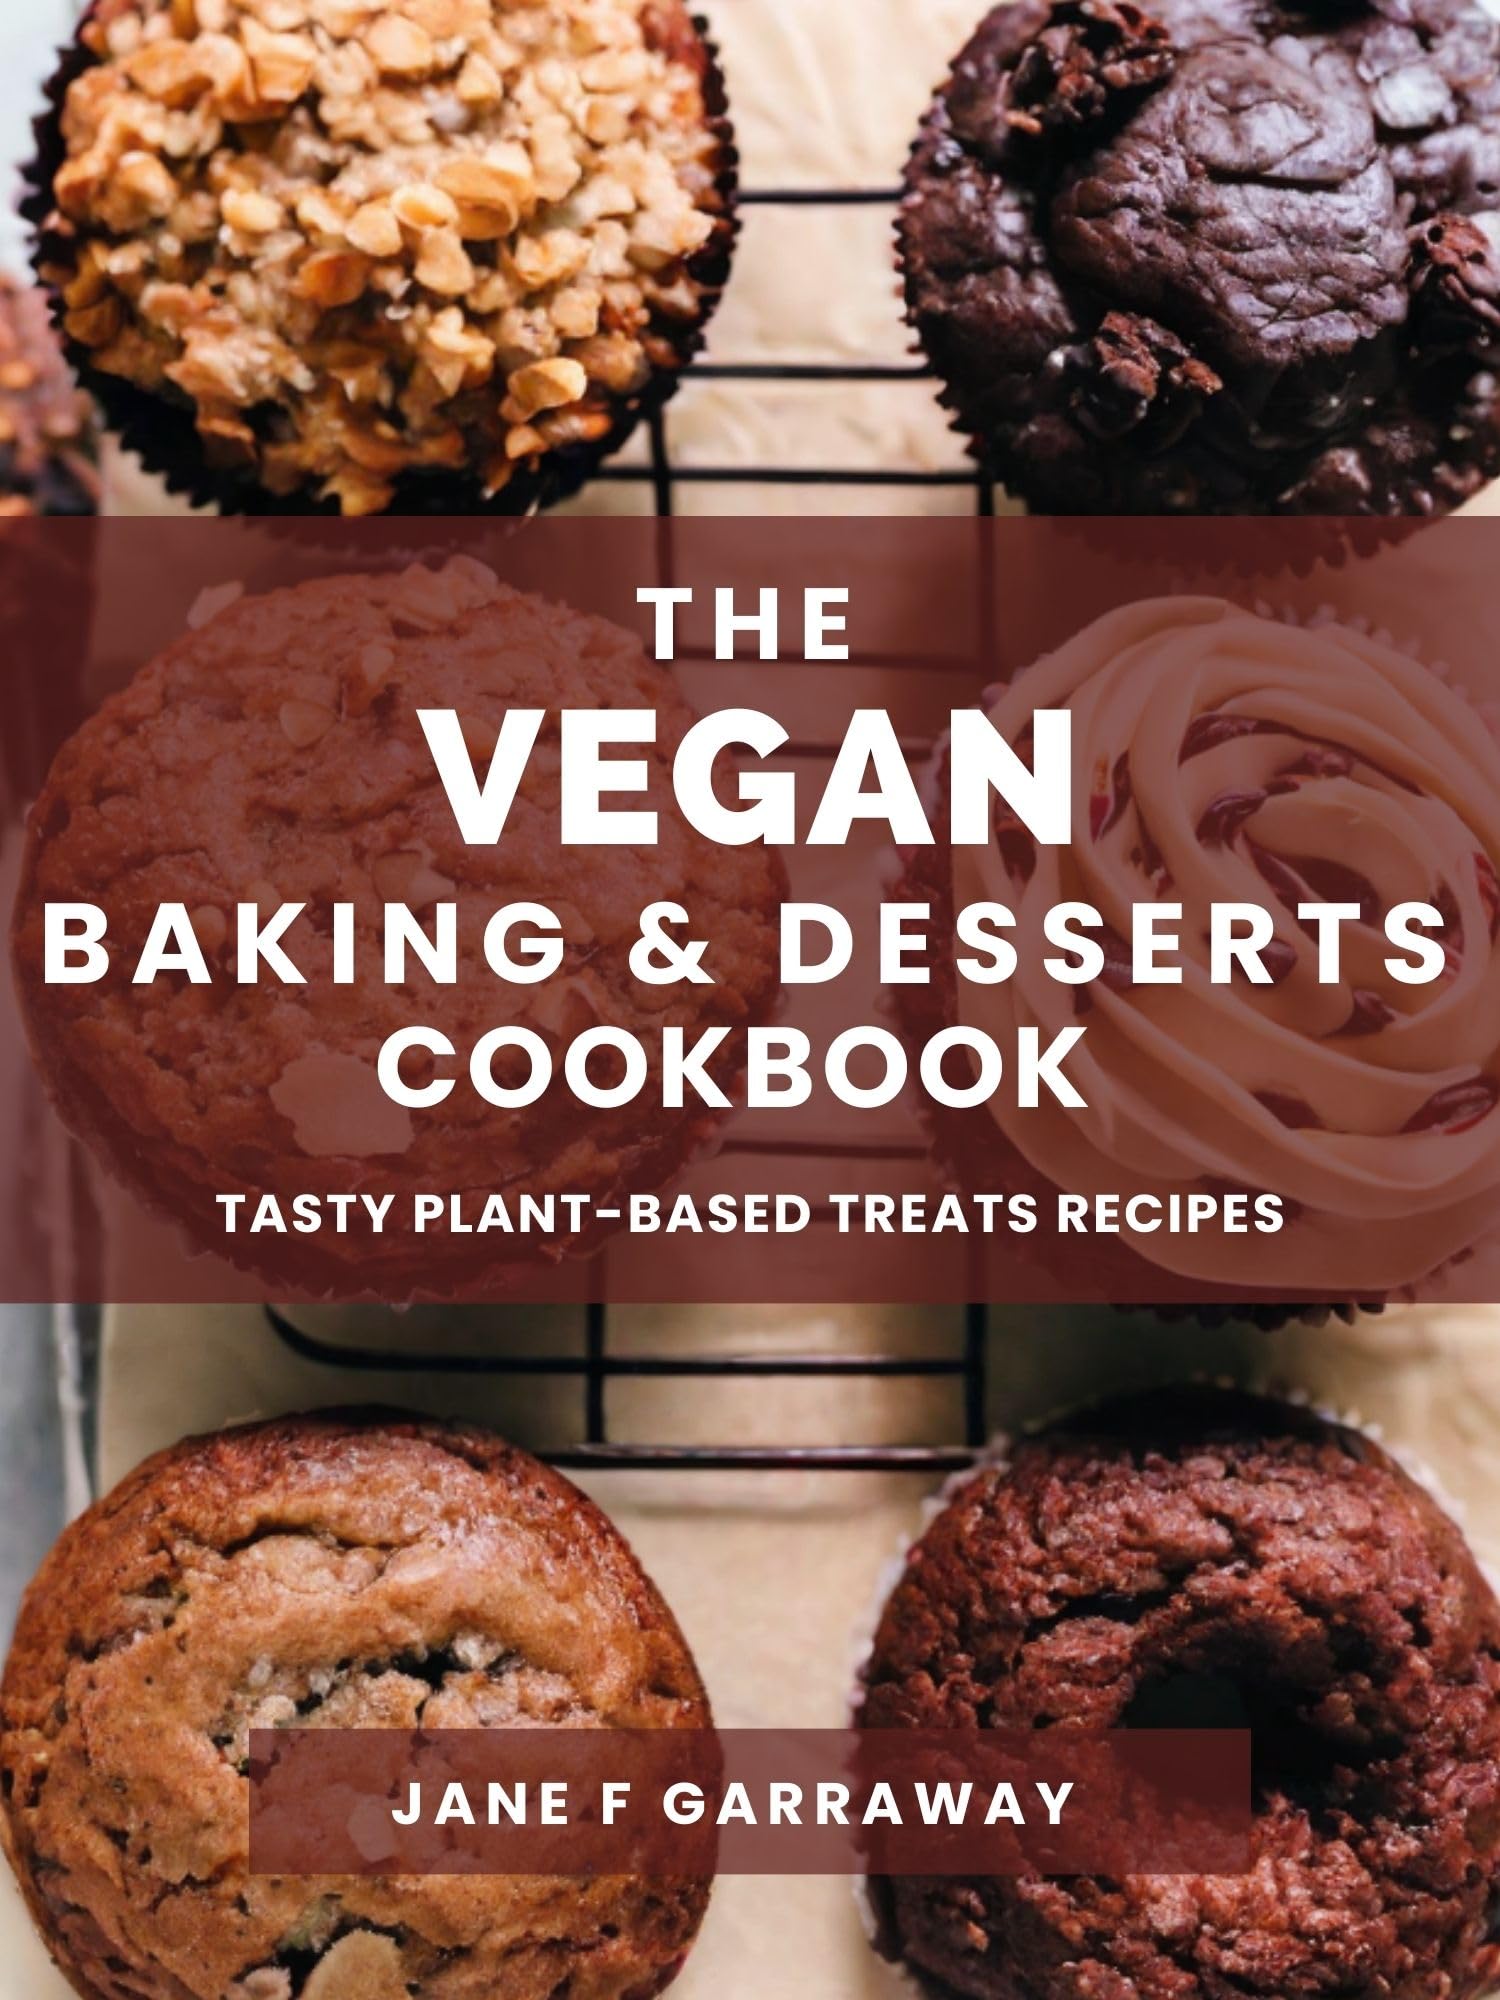 The Vegan Baking & Desserts Cookbook: 100+ Irresistible Plant-Based Treats Recipes for Cookies, Cakes, Bread, Ice Cream, Tarts, Pudding, Bars & More Includes No Bake, Gluten-Free, Dairy-Free Options